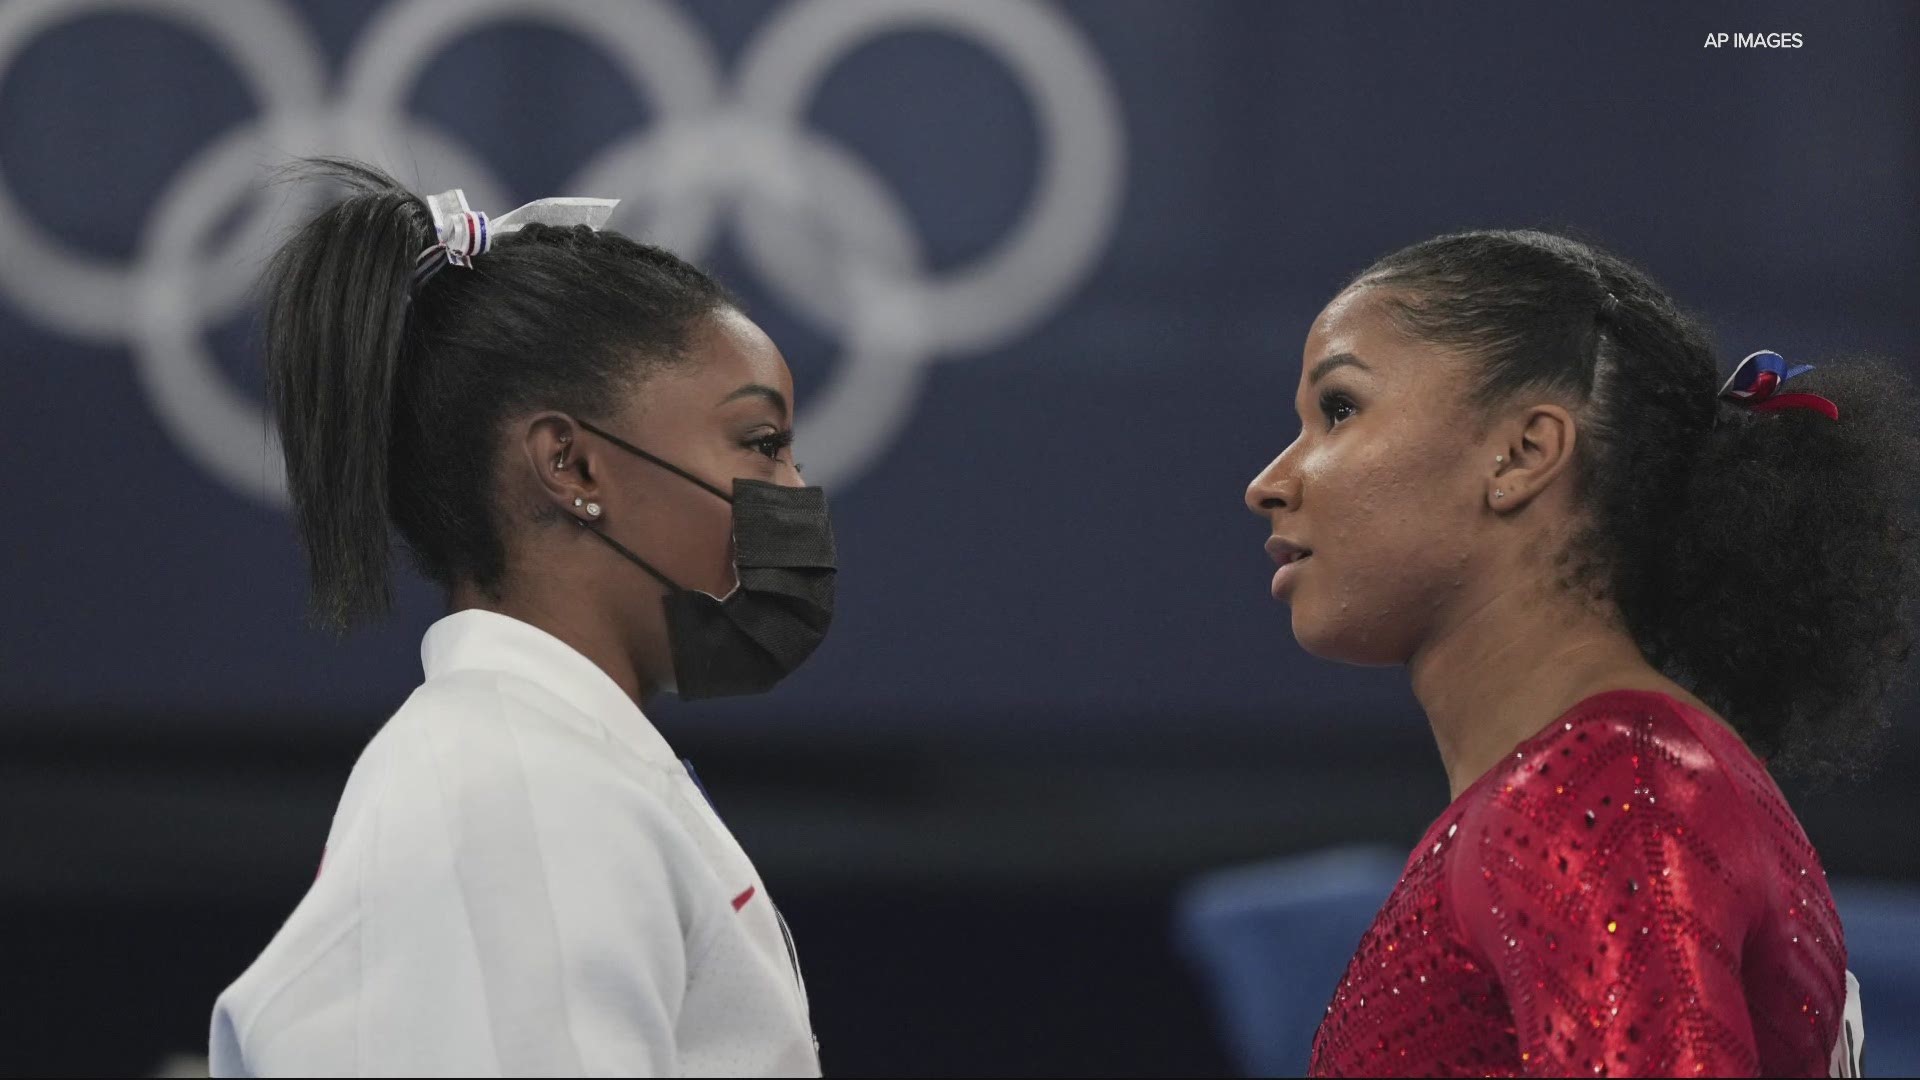 Jordan Chiles stepped in after Simone Biles pulled out of the team final on Tuesday.